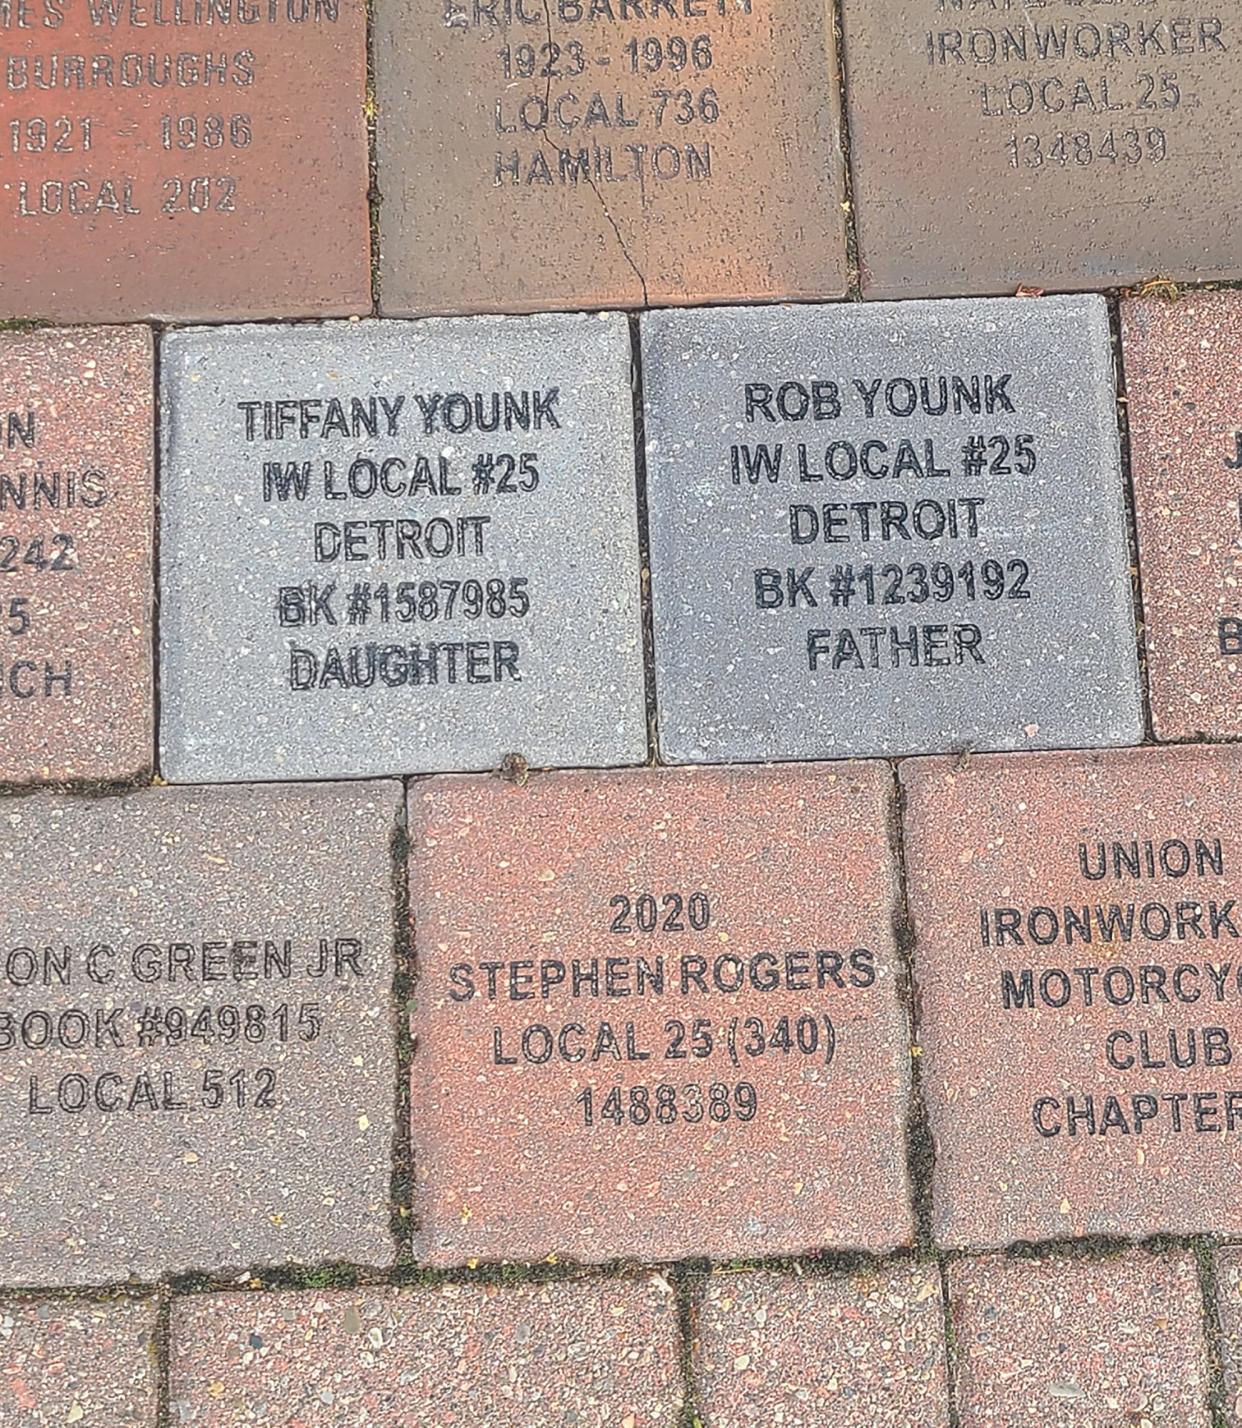 Rob and Tiffany Younk both have bricks on the Ironworker Hall of Fame in Mackinaw City.